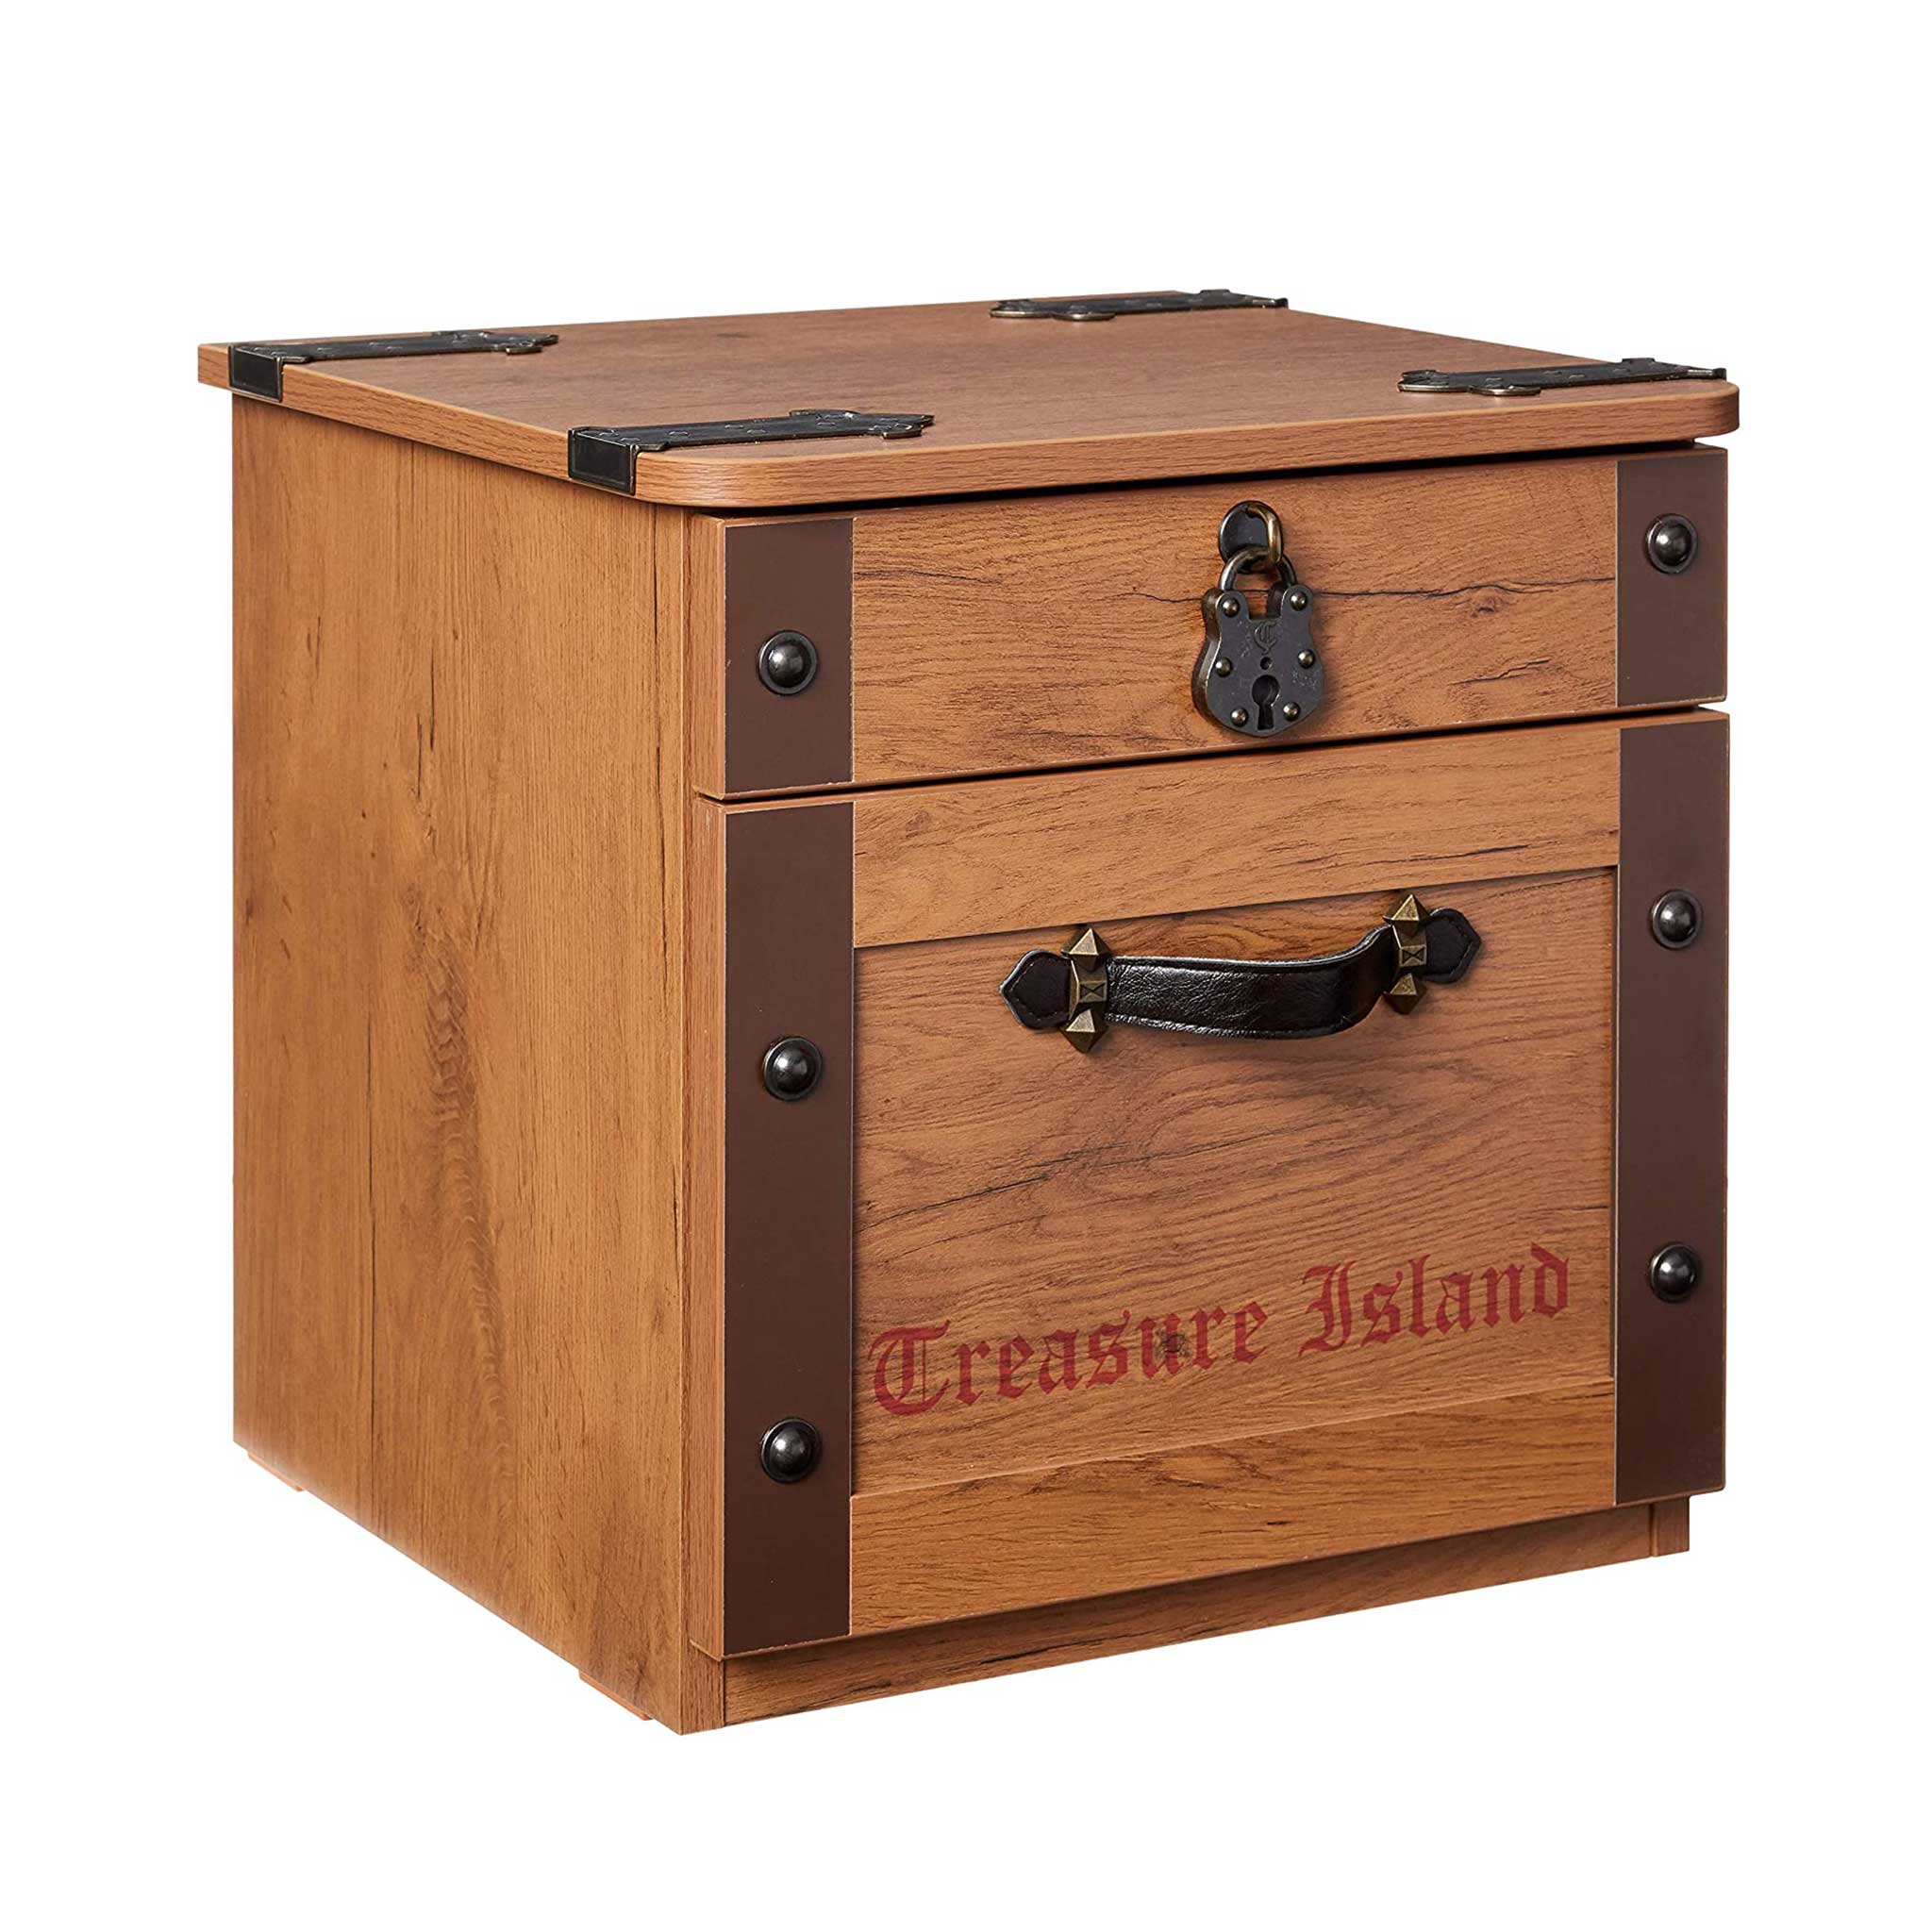 Pirate Nightstand with 2 Drawers and Leatherette Handles